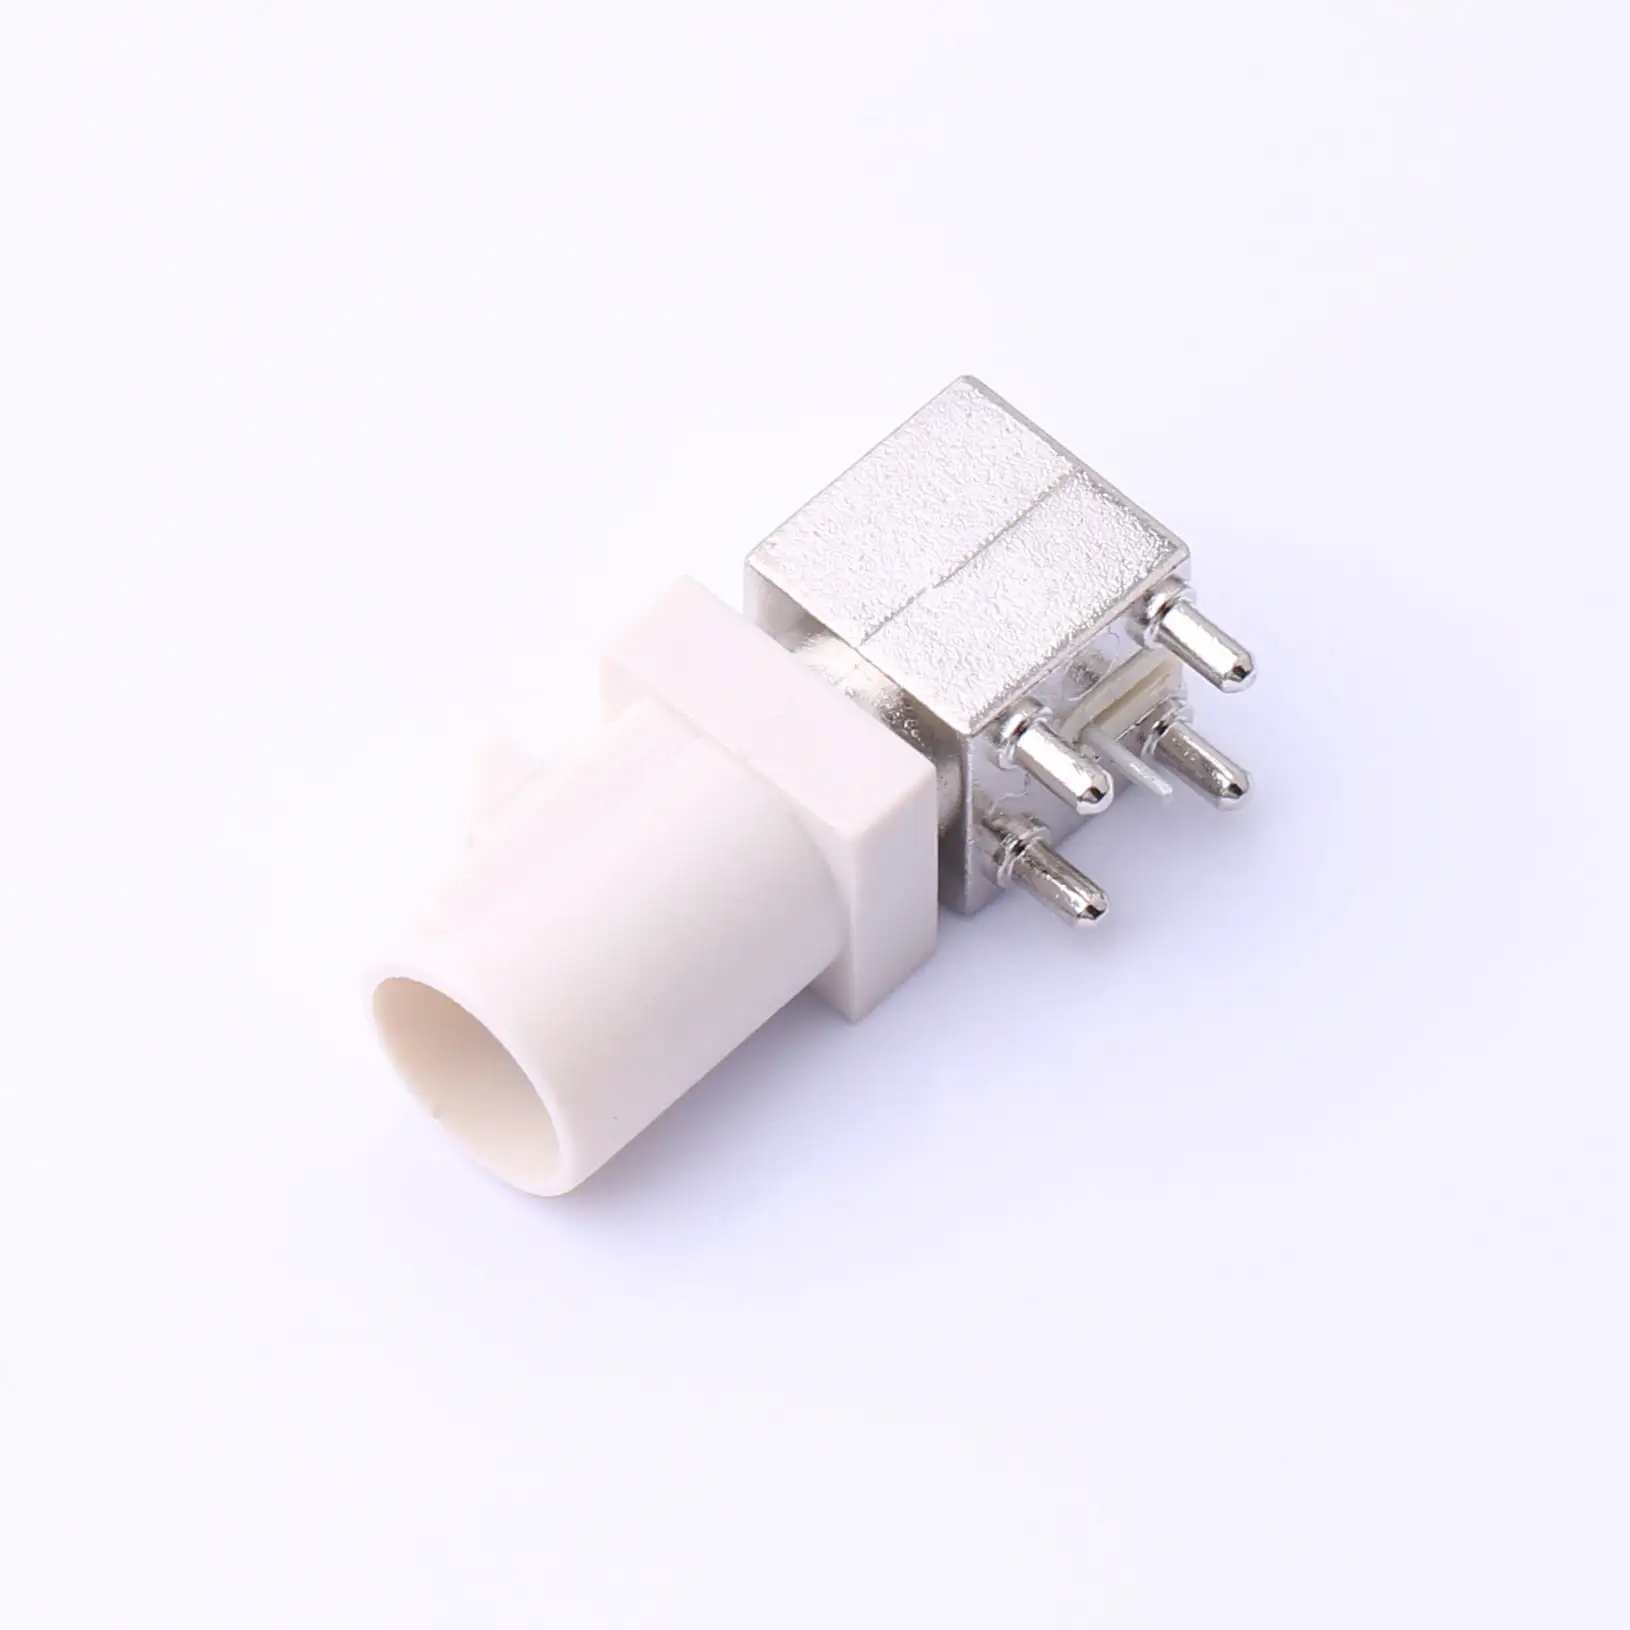 Kinghelm White fakra connector male FAKRA B type Rf coaxial connector Right Angle Male Connector fakra antenna